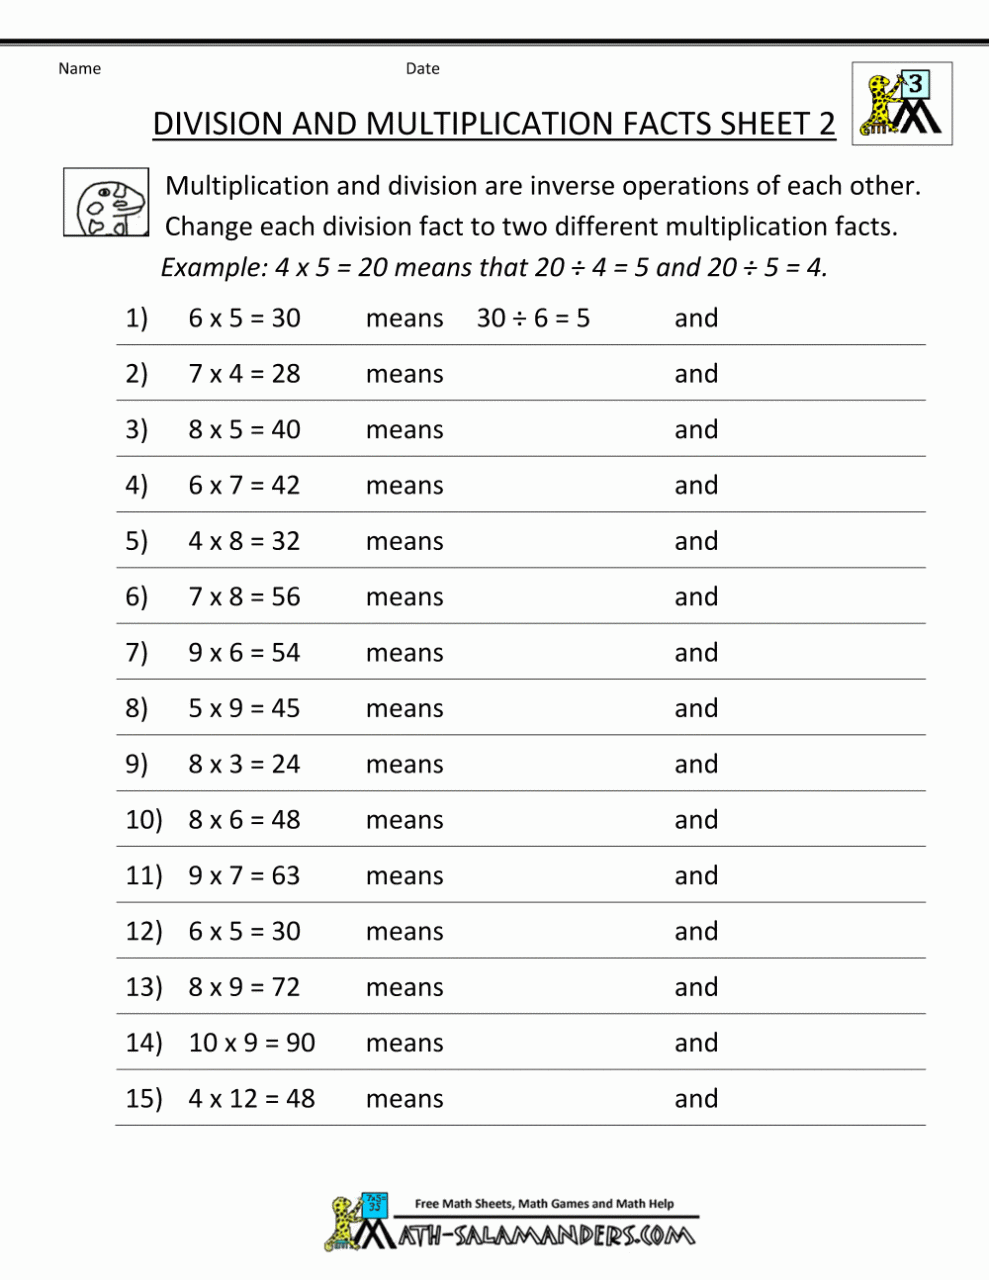 Division And Multiplication Worksheets Pdf